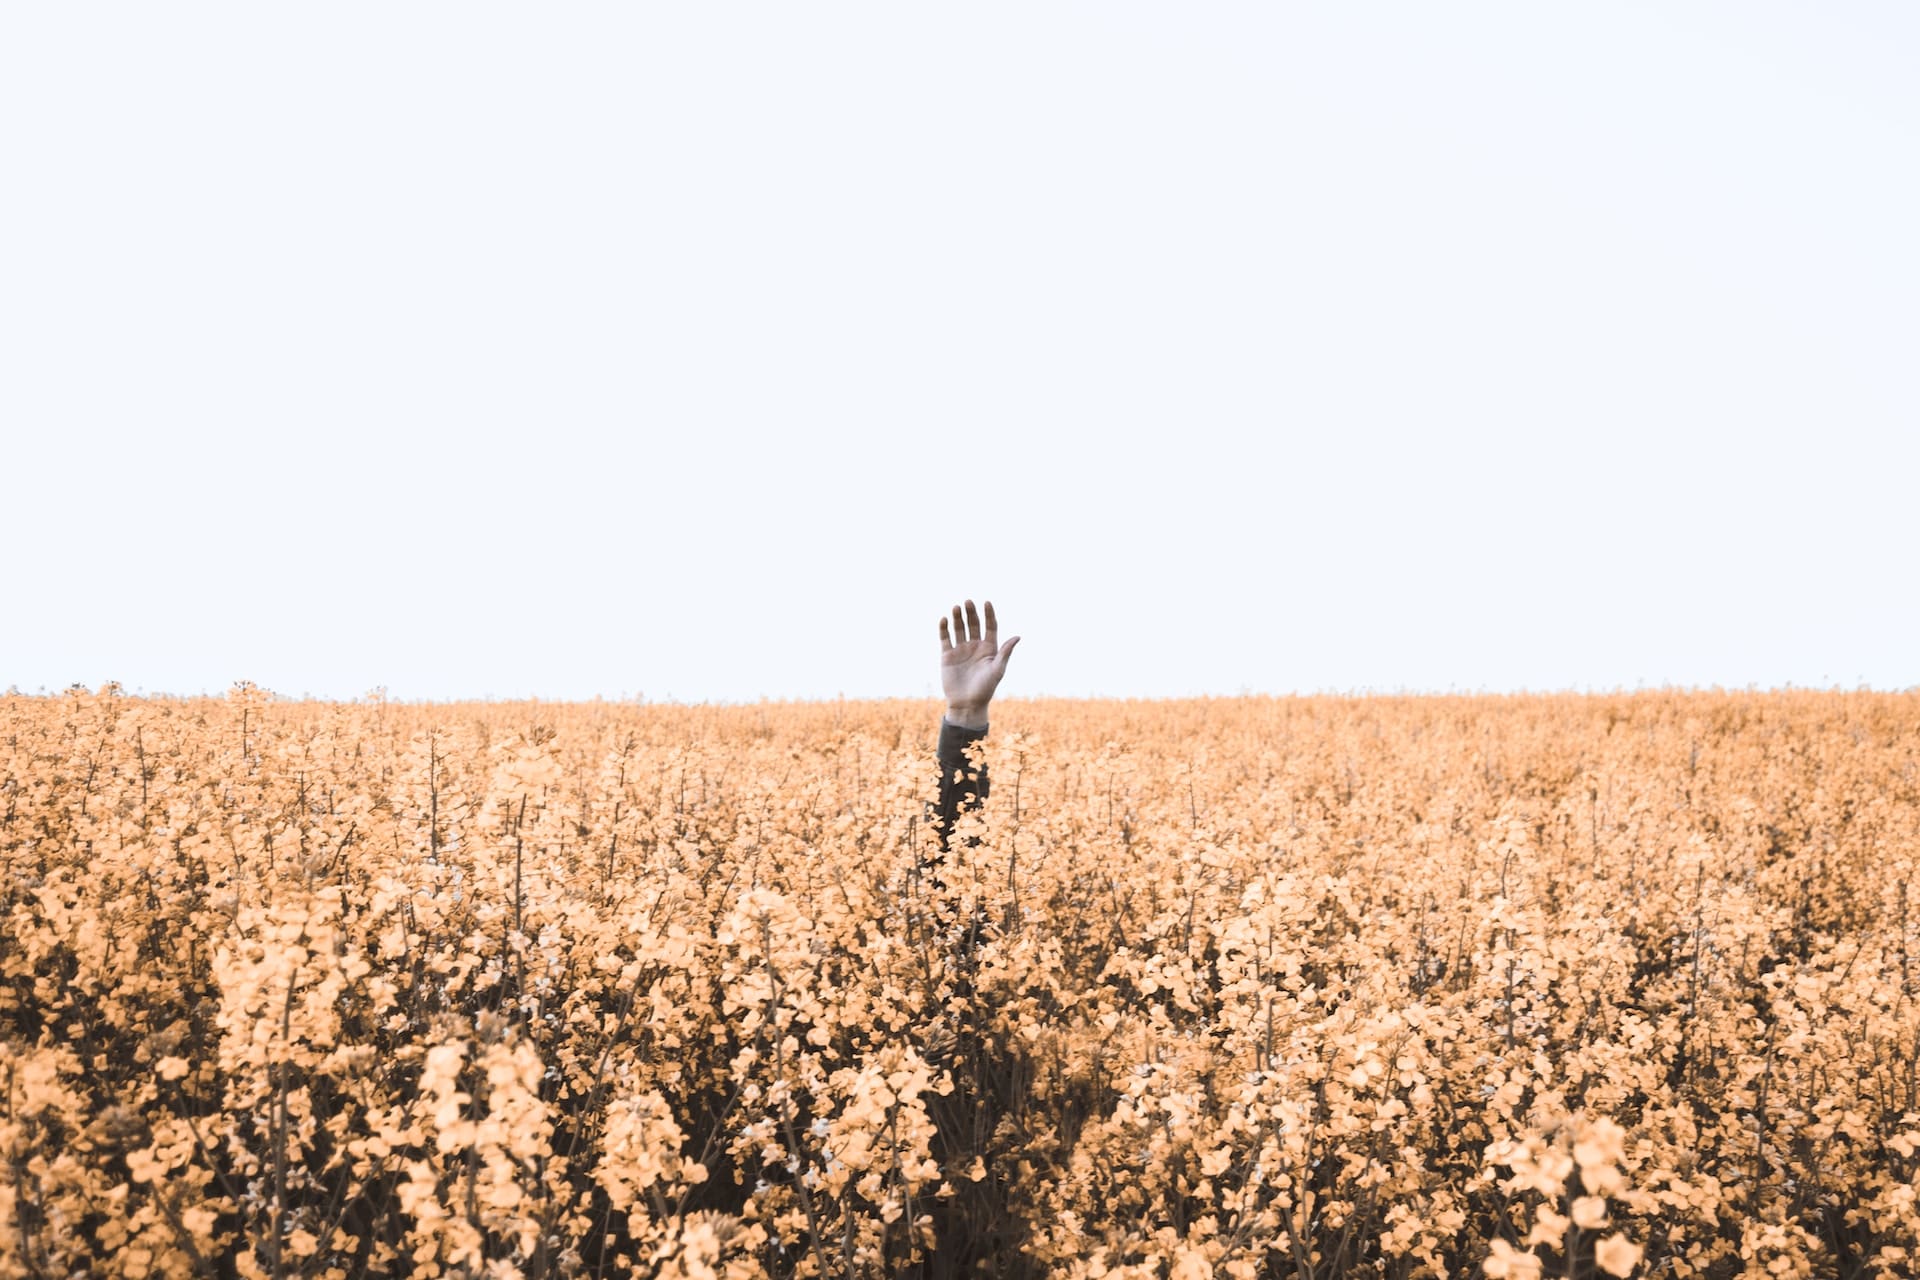 A hand outstretched in a field of grains